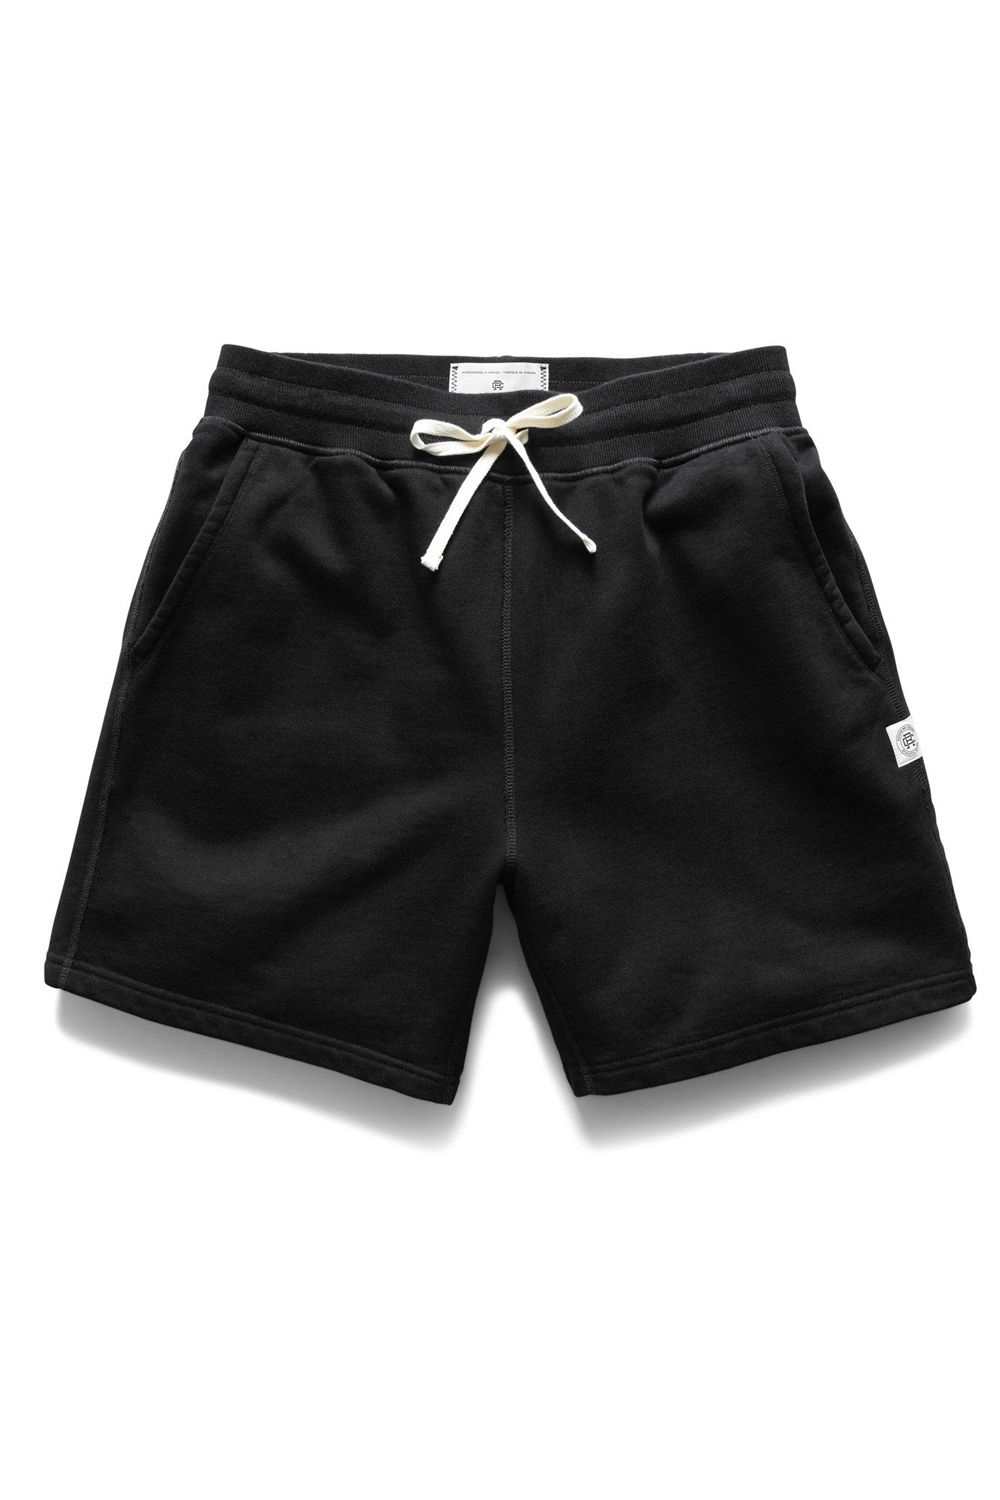 REIGNING CHAMP - 【国内正規品】 MIDWEIGHT TERRY SHORT 6 / ミッド ...